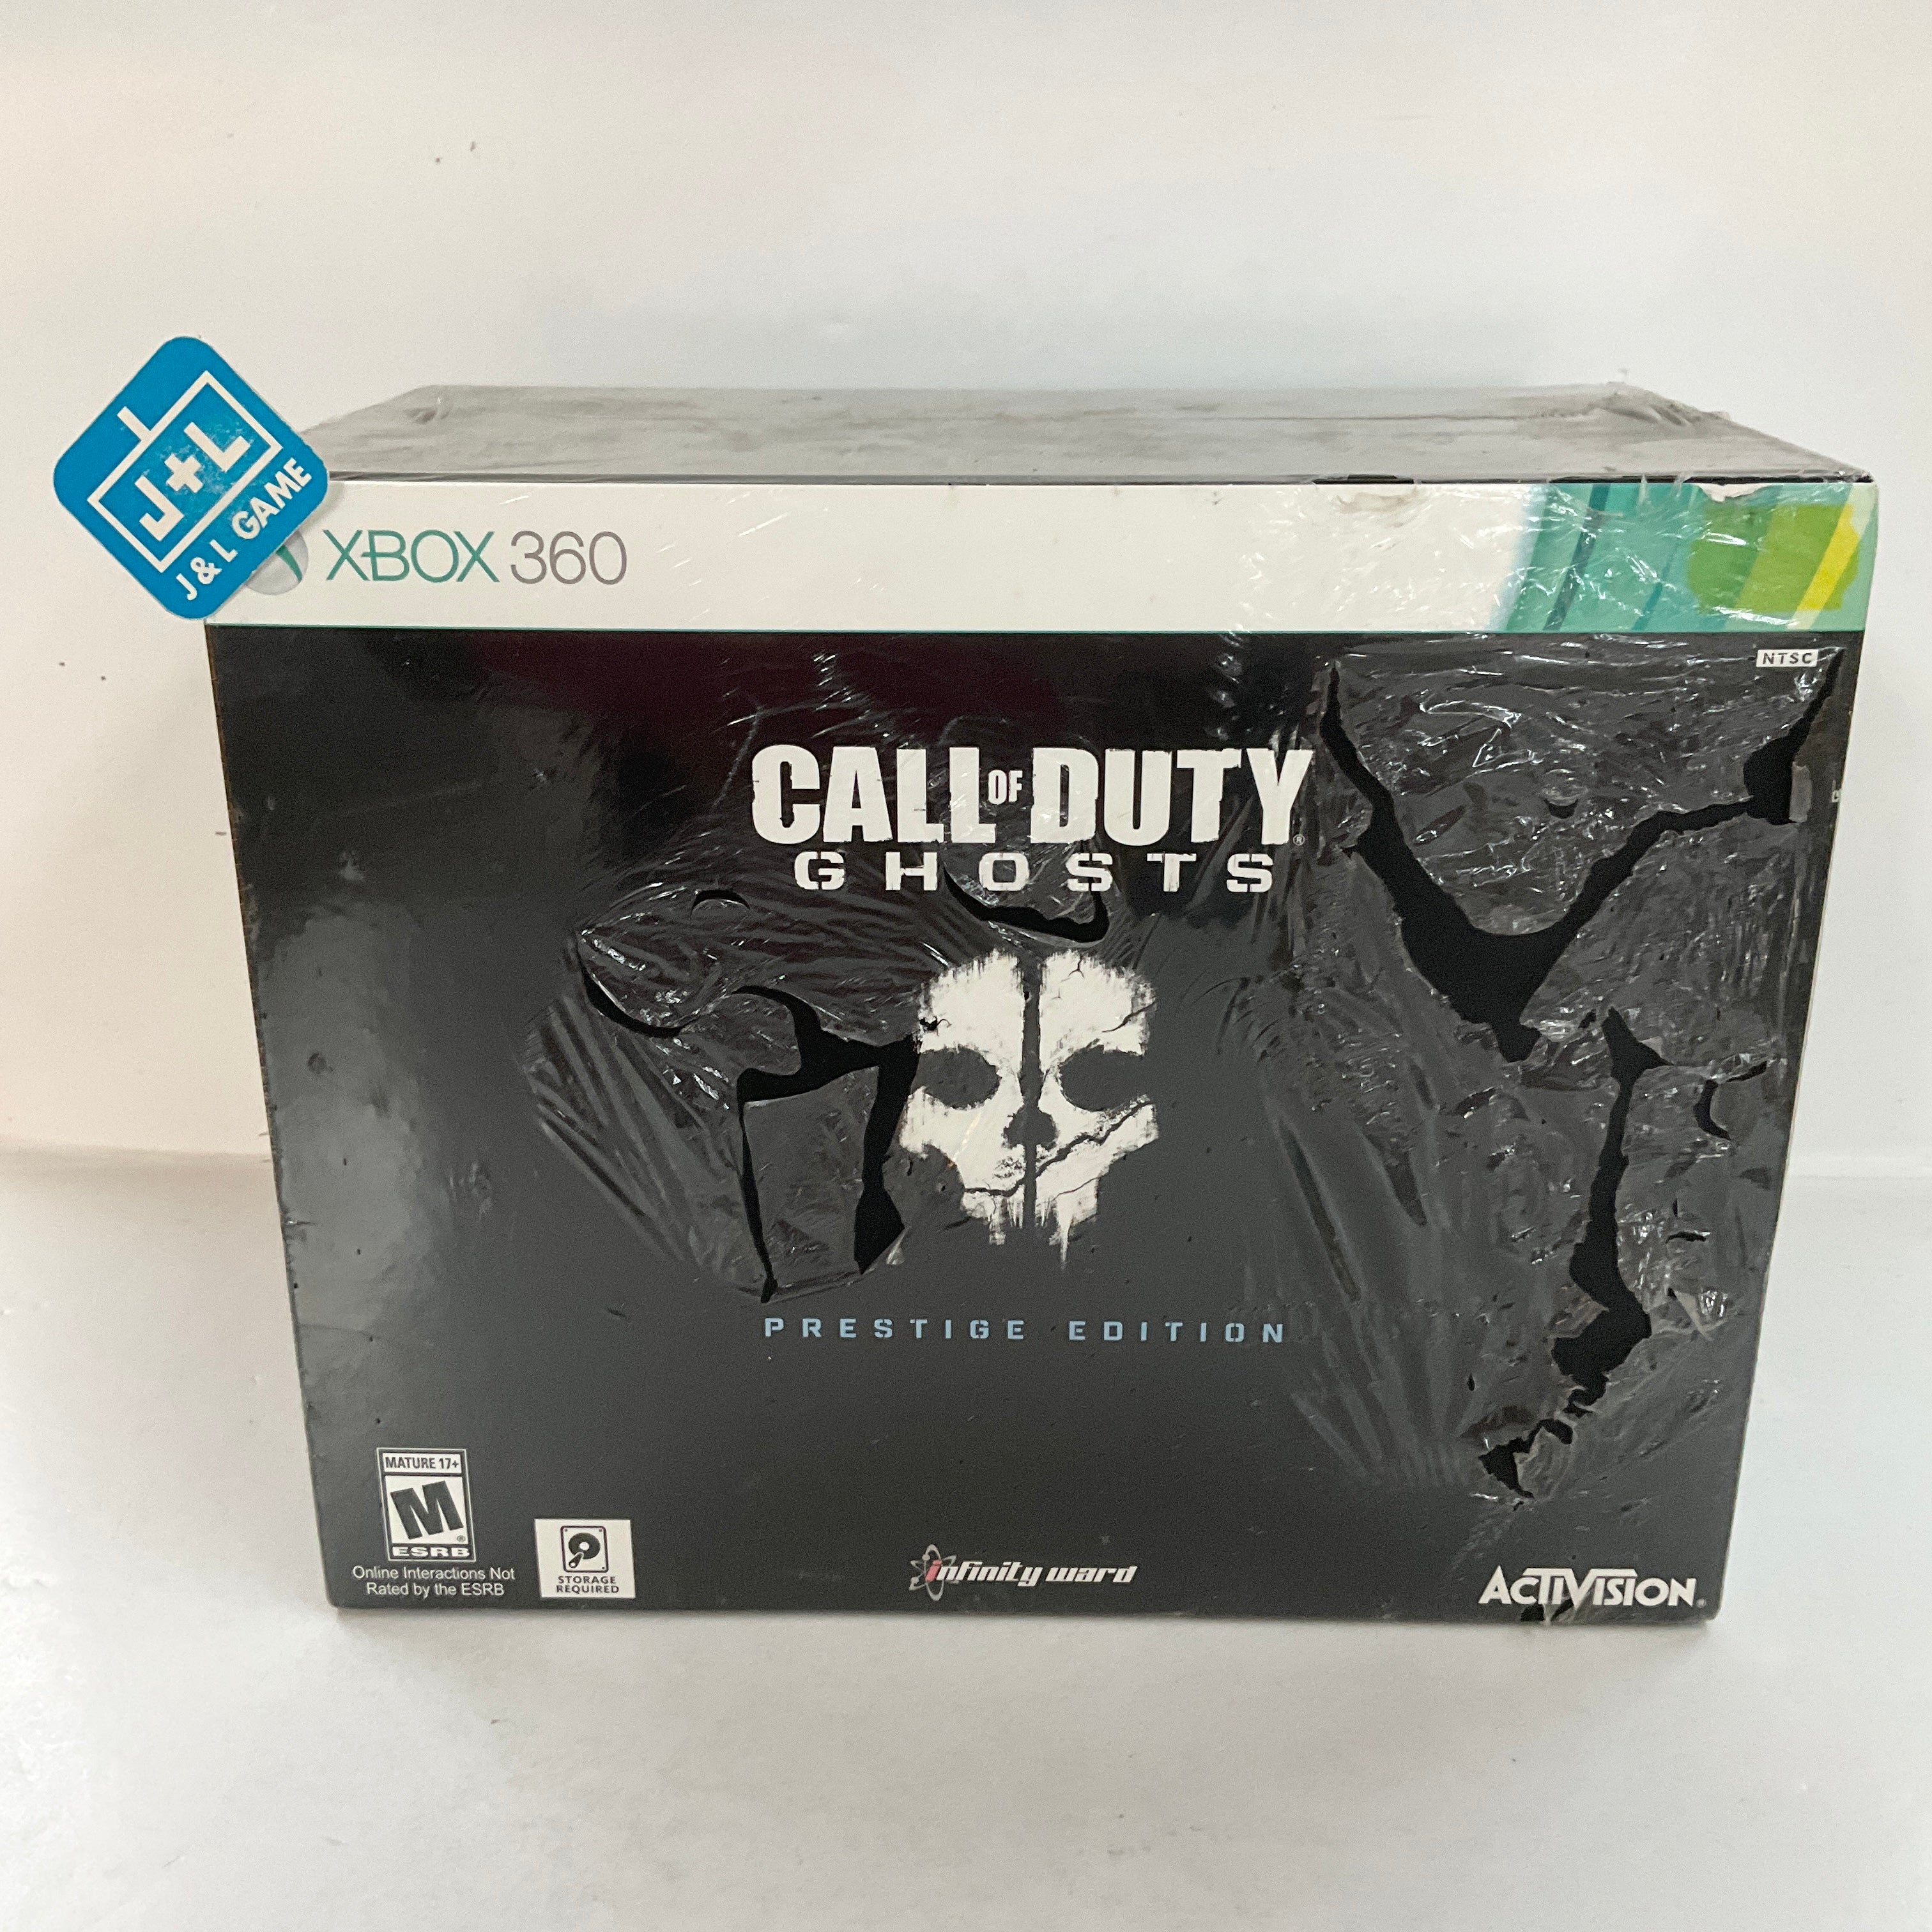 Call of Duty: Ghosts (Prestige Edition) - Xbox 360 Video Games Activision   